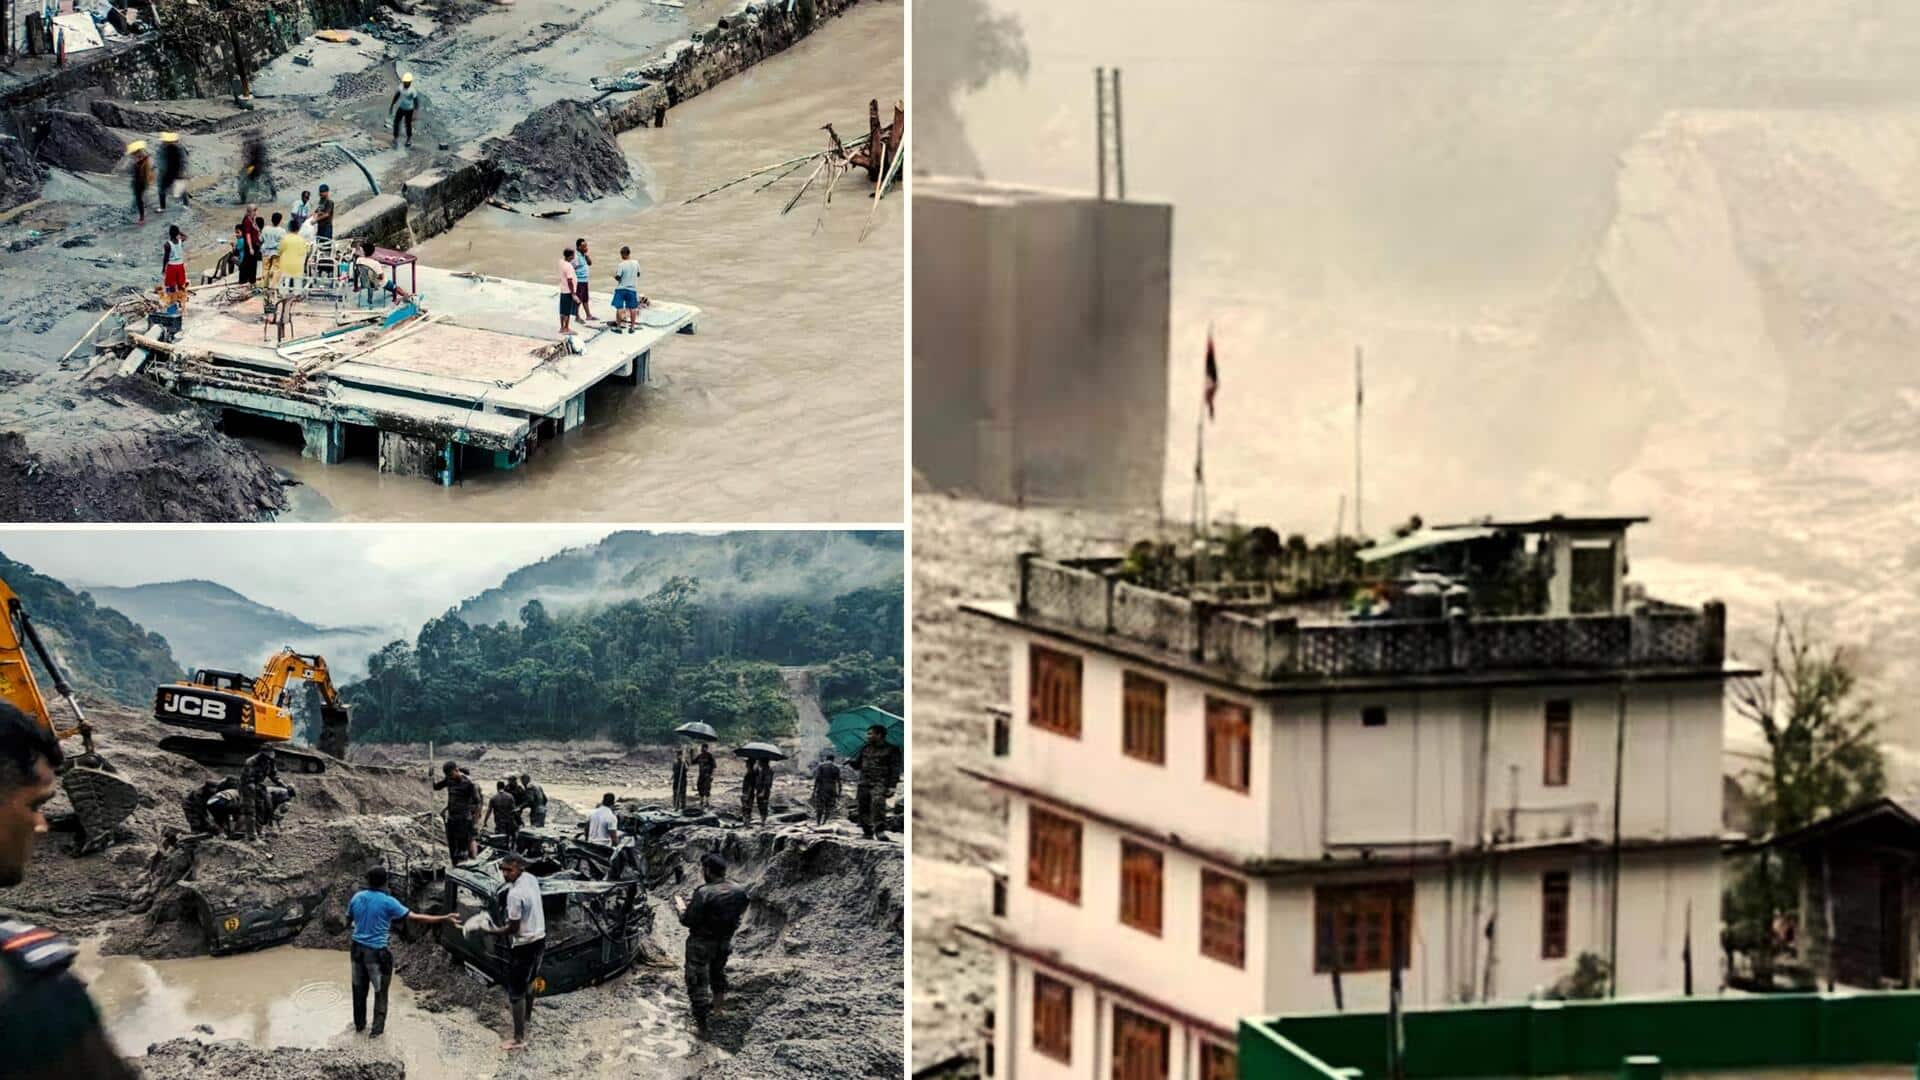 Sikkim flood: Death toll rises to 77, over 100 missing